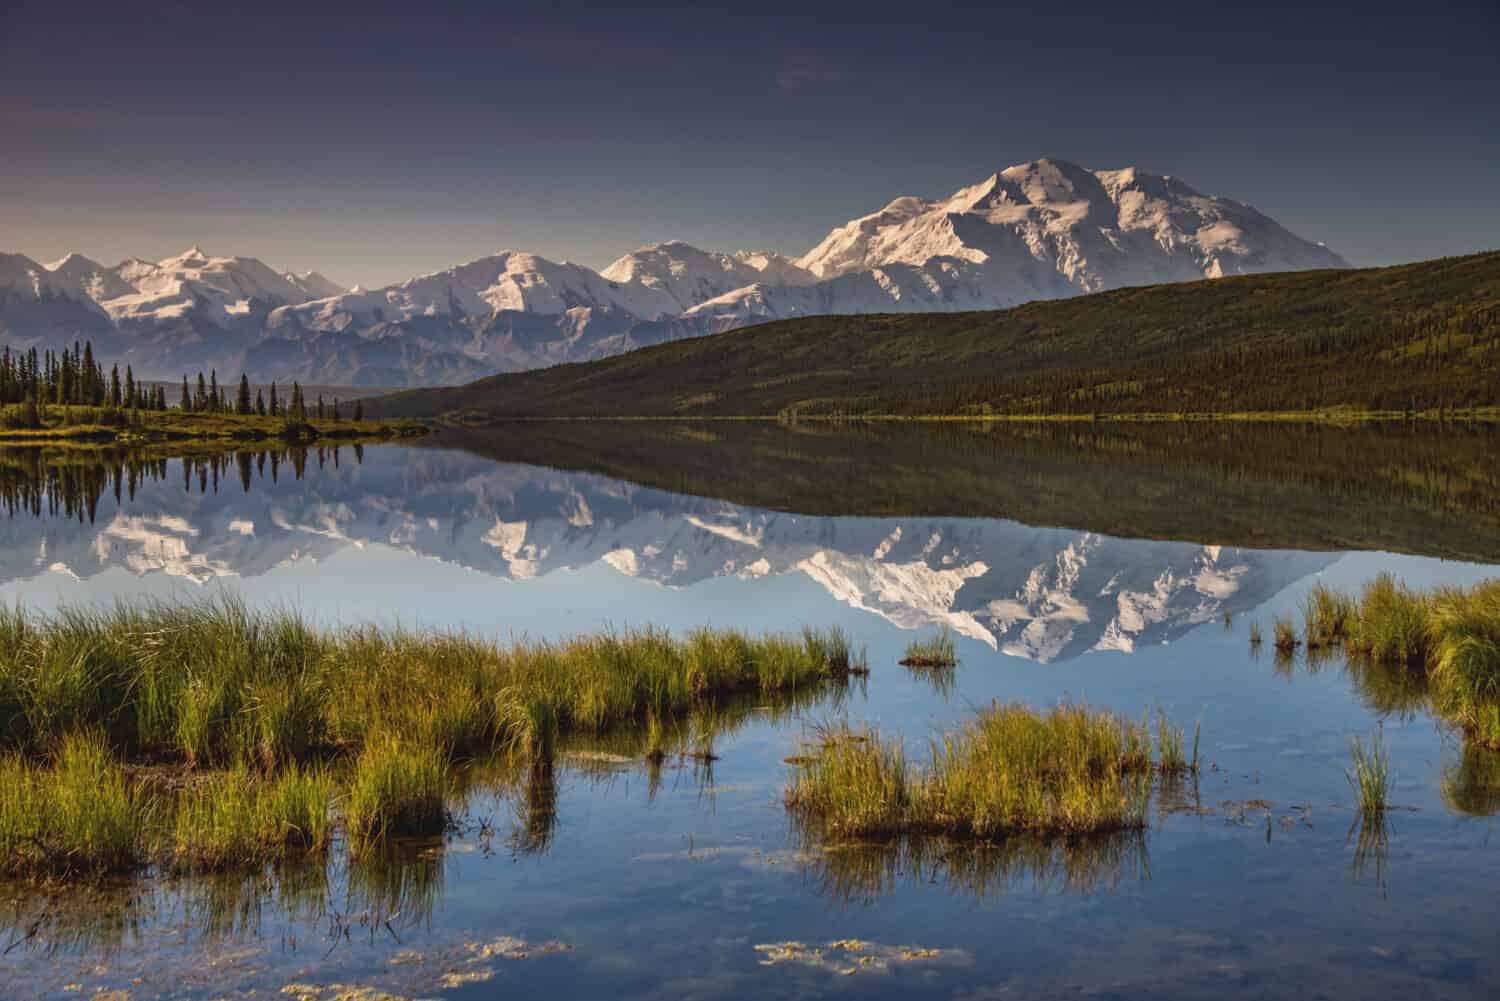 view of alaska's mount denali reflected in calm Wonder Lake, with clear blue sky above